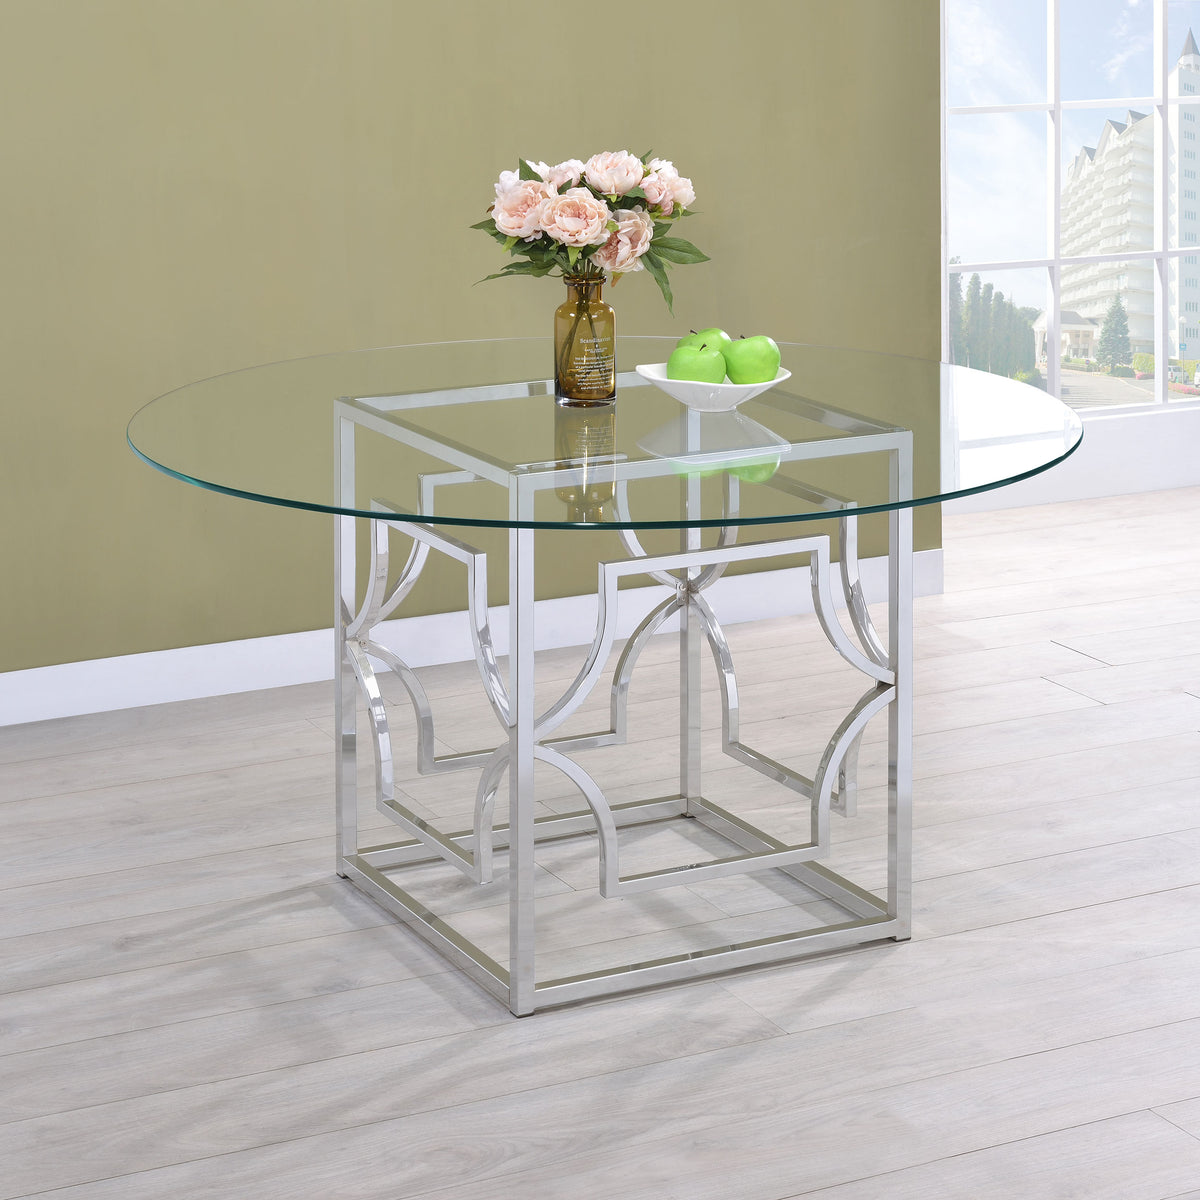 Starlight Round Glass Top Dining Table  Las Vegas Furniture Stores